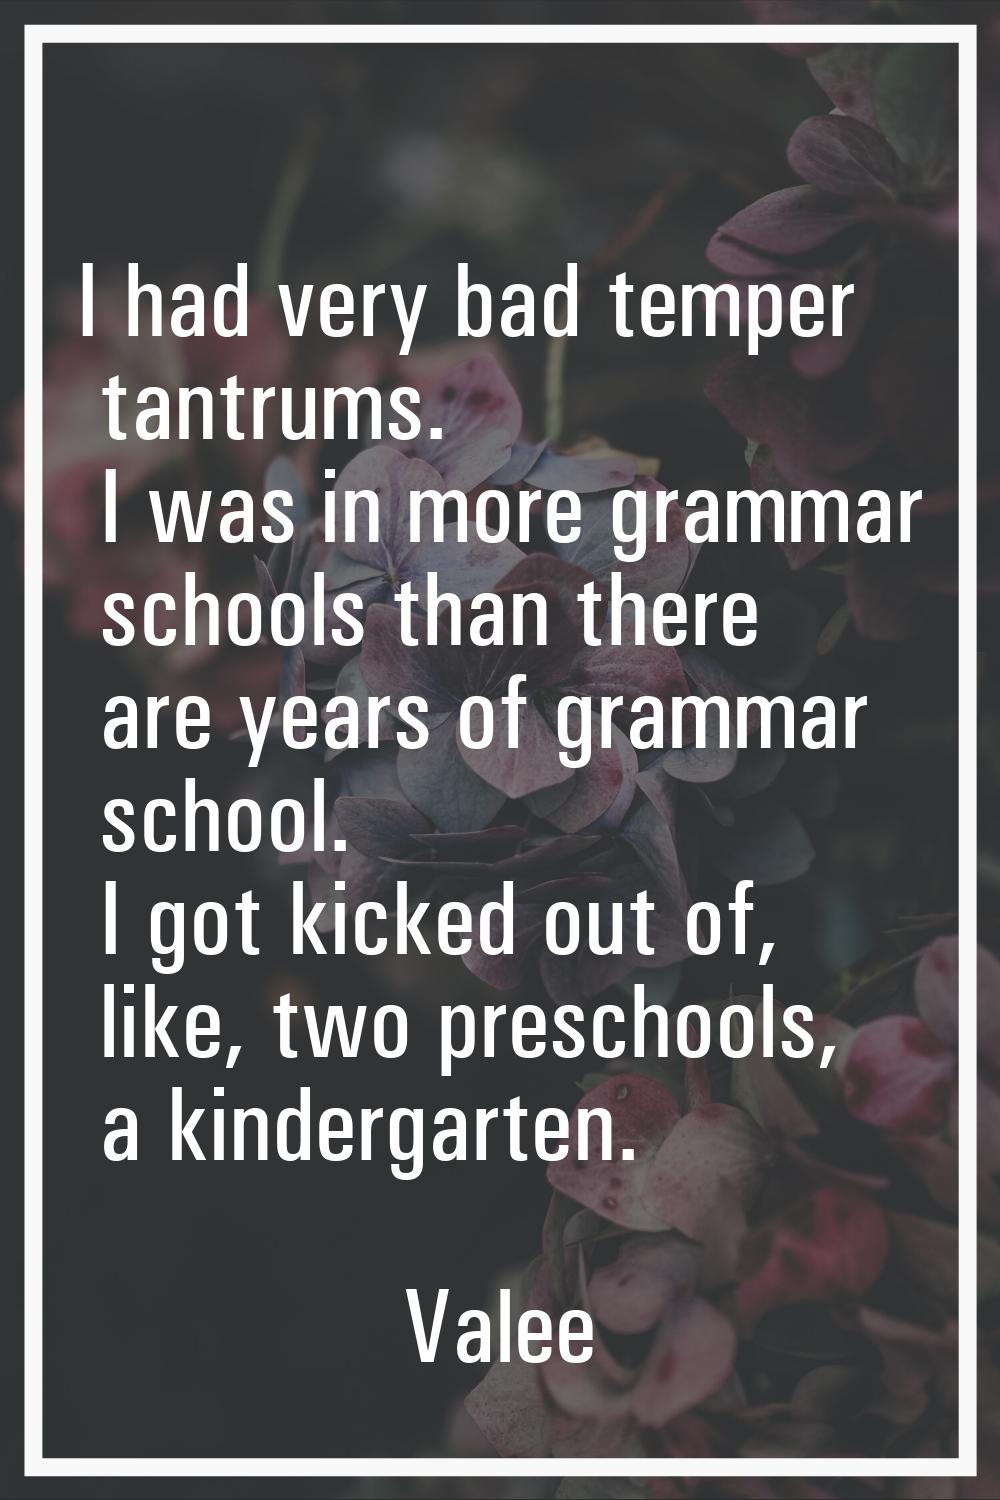 I had very bad temper tantrums. I was in more grammar schools than there are years of grammar schoo